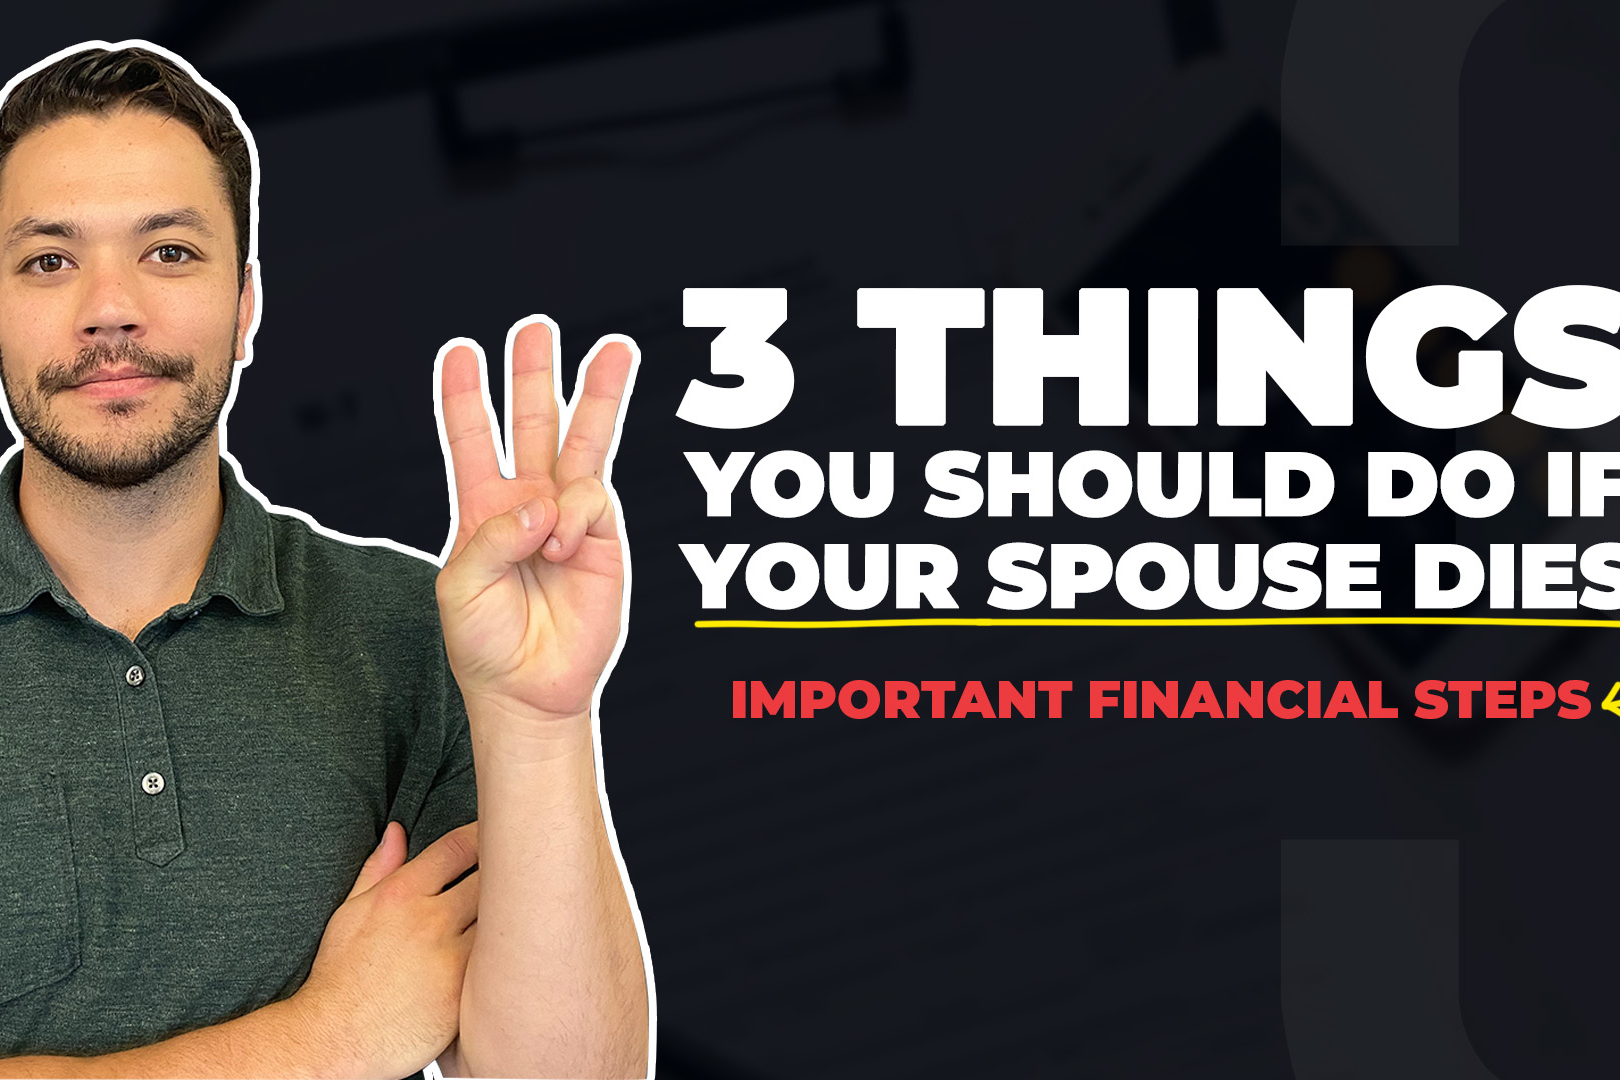 Financial Things to Do When Your Spouse Dies